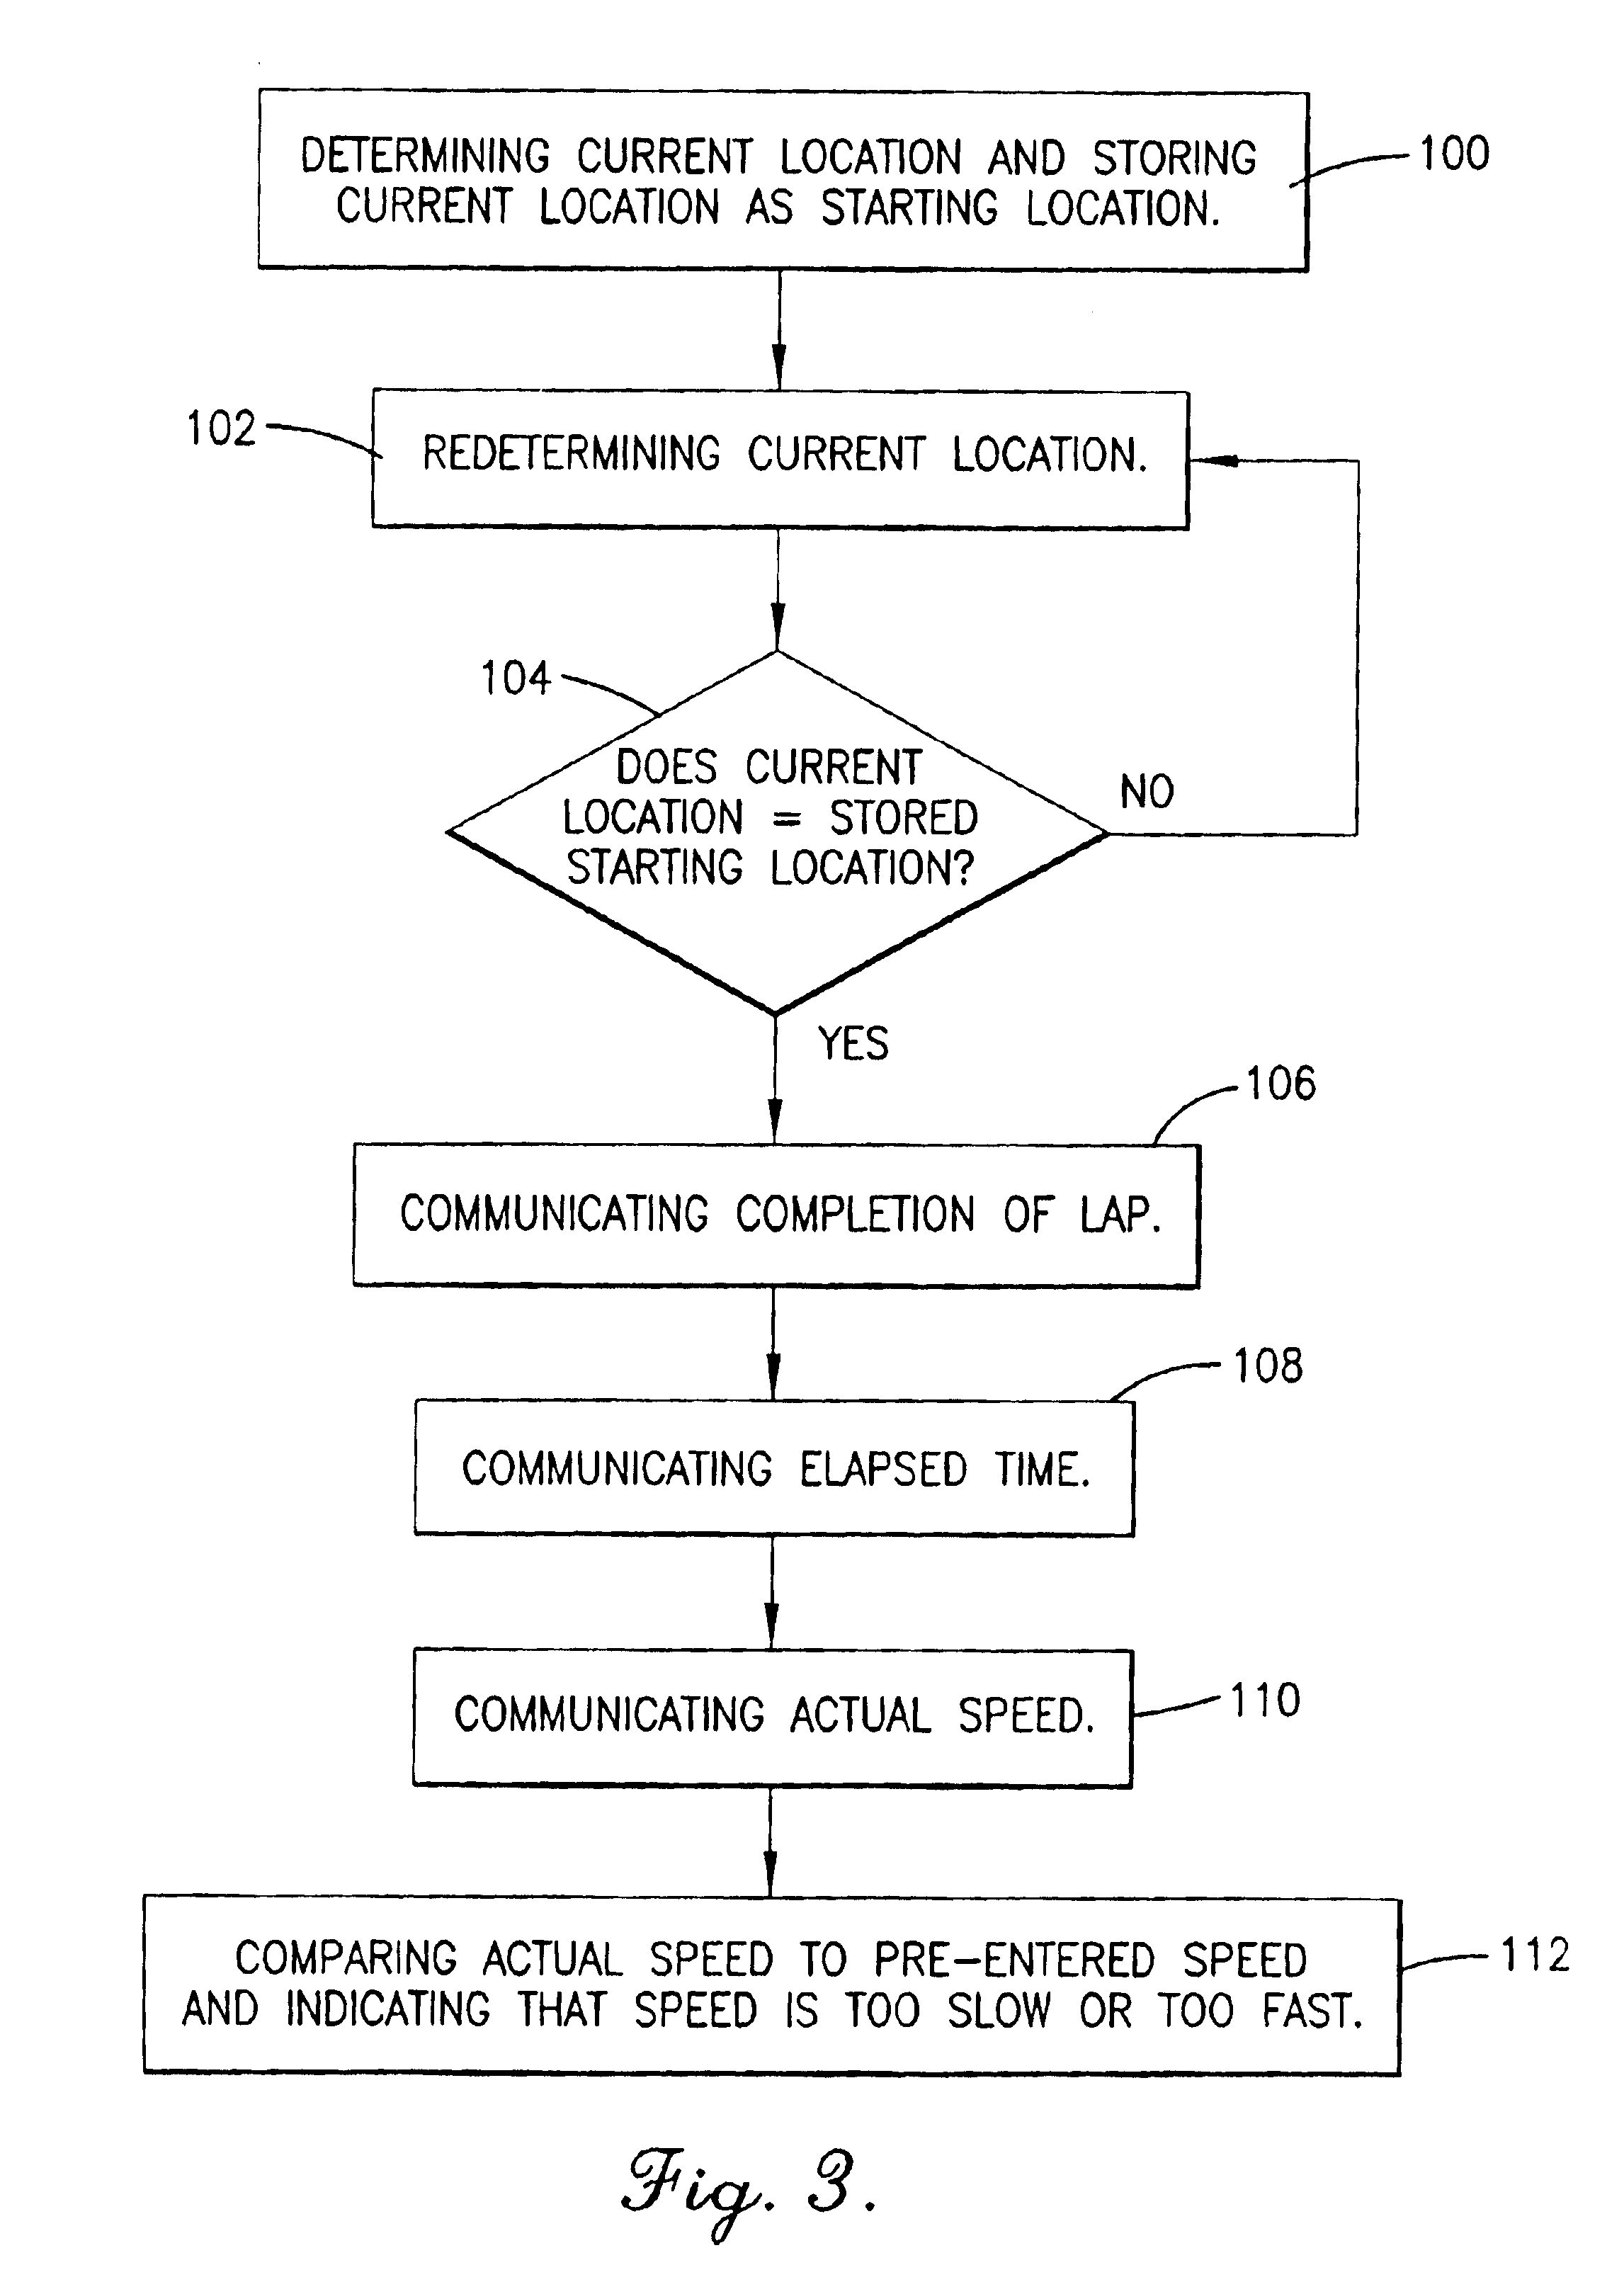 Portable apparatus with performance monitoring and audio entertainment features